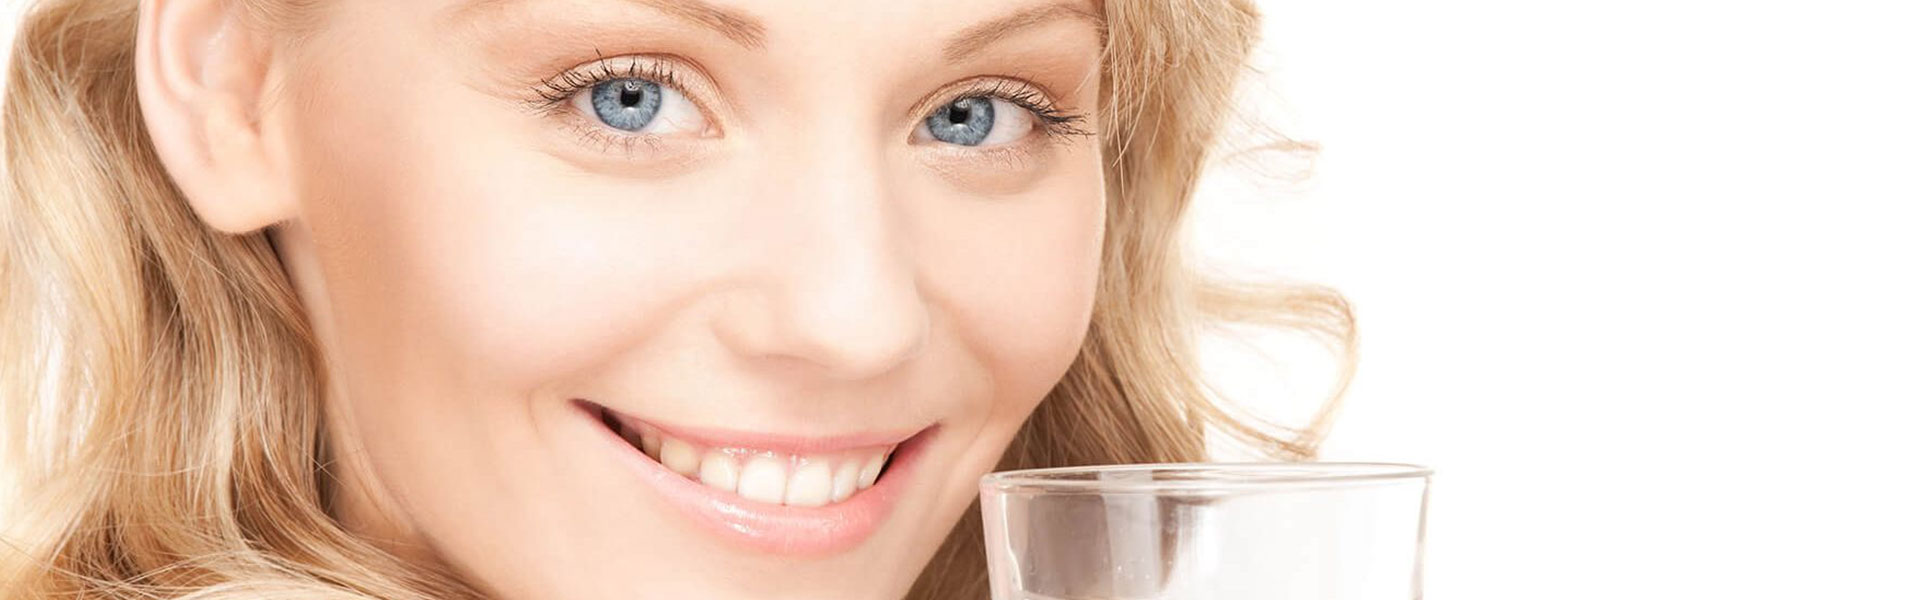 Are You Drinking Enough Water Every Day?